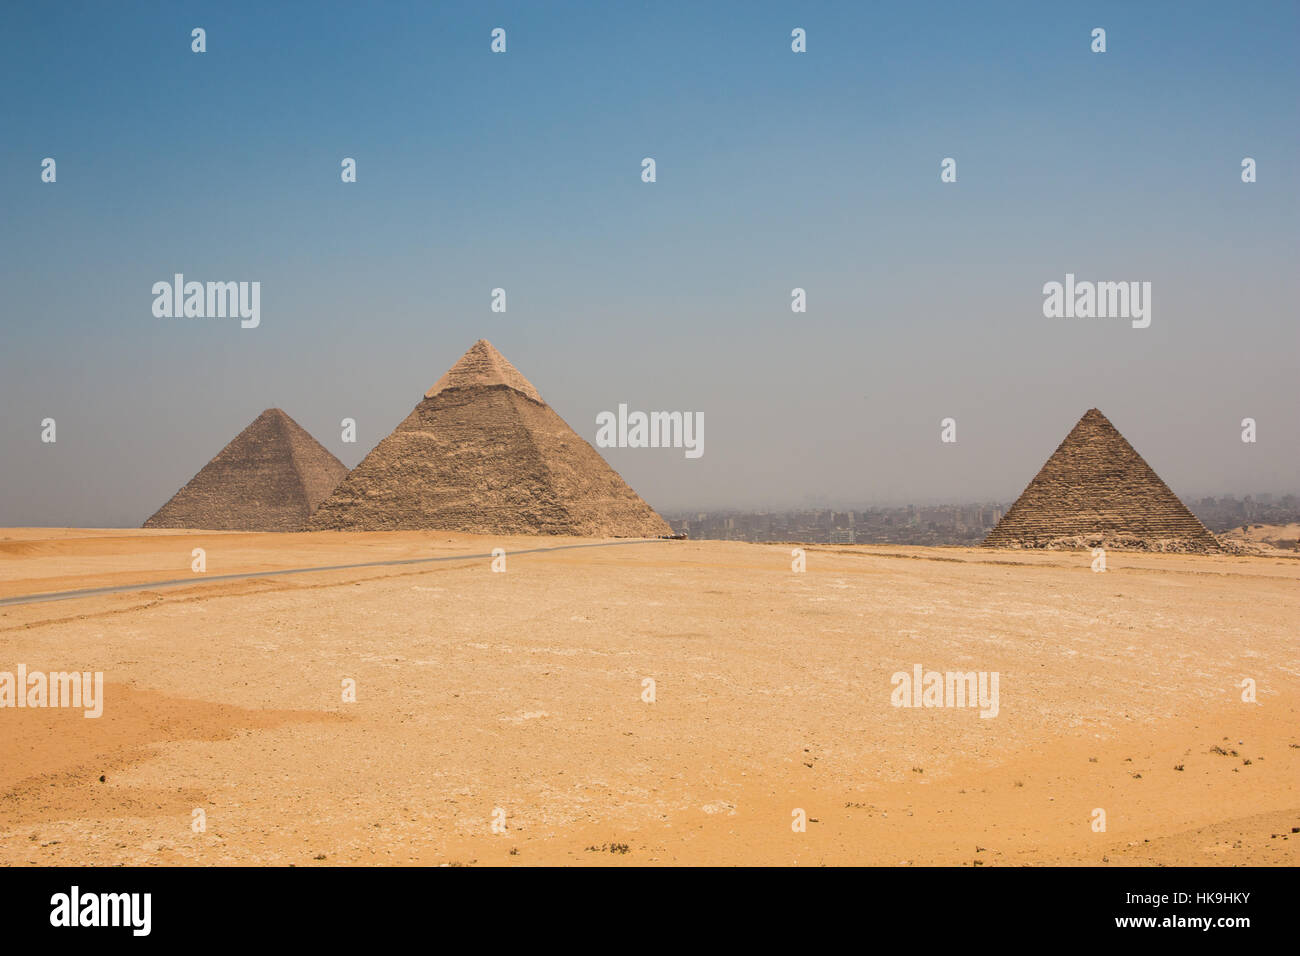 The Great Pyramids of Giza in Cairo, Egypt Stock Photo